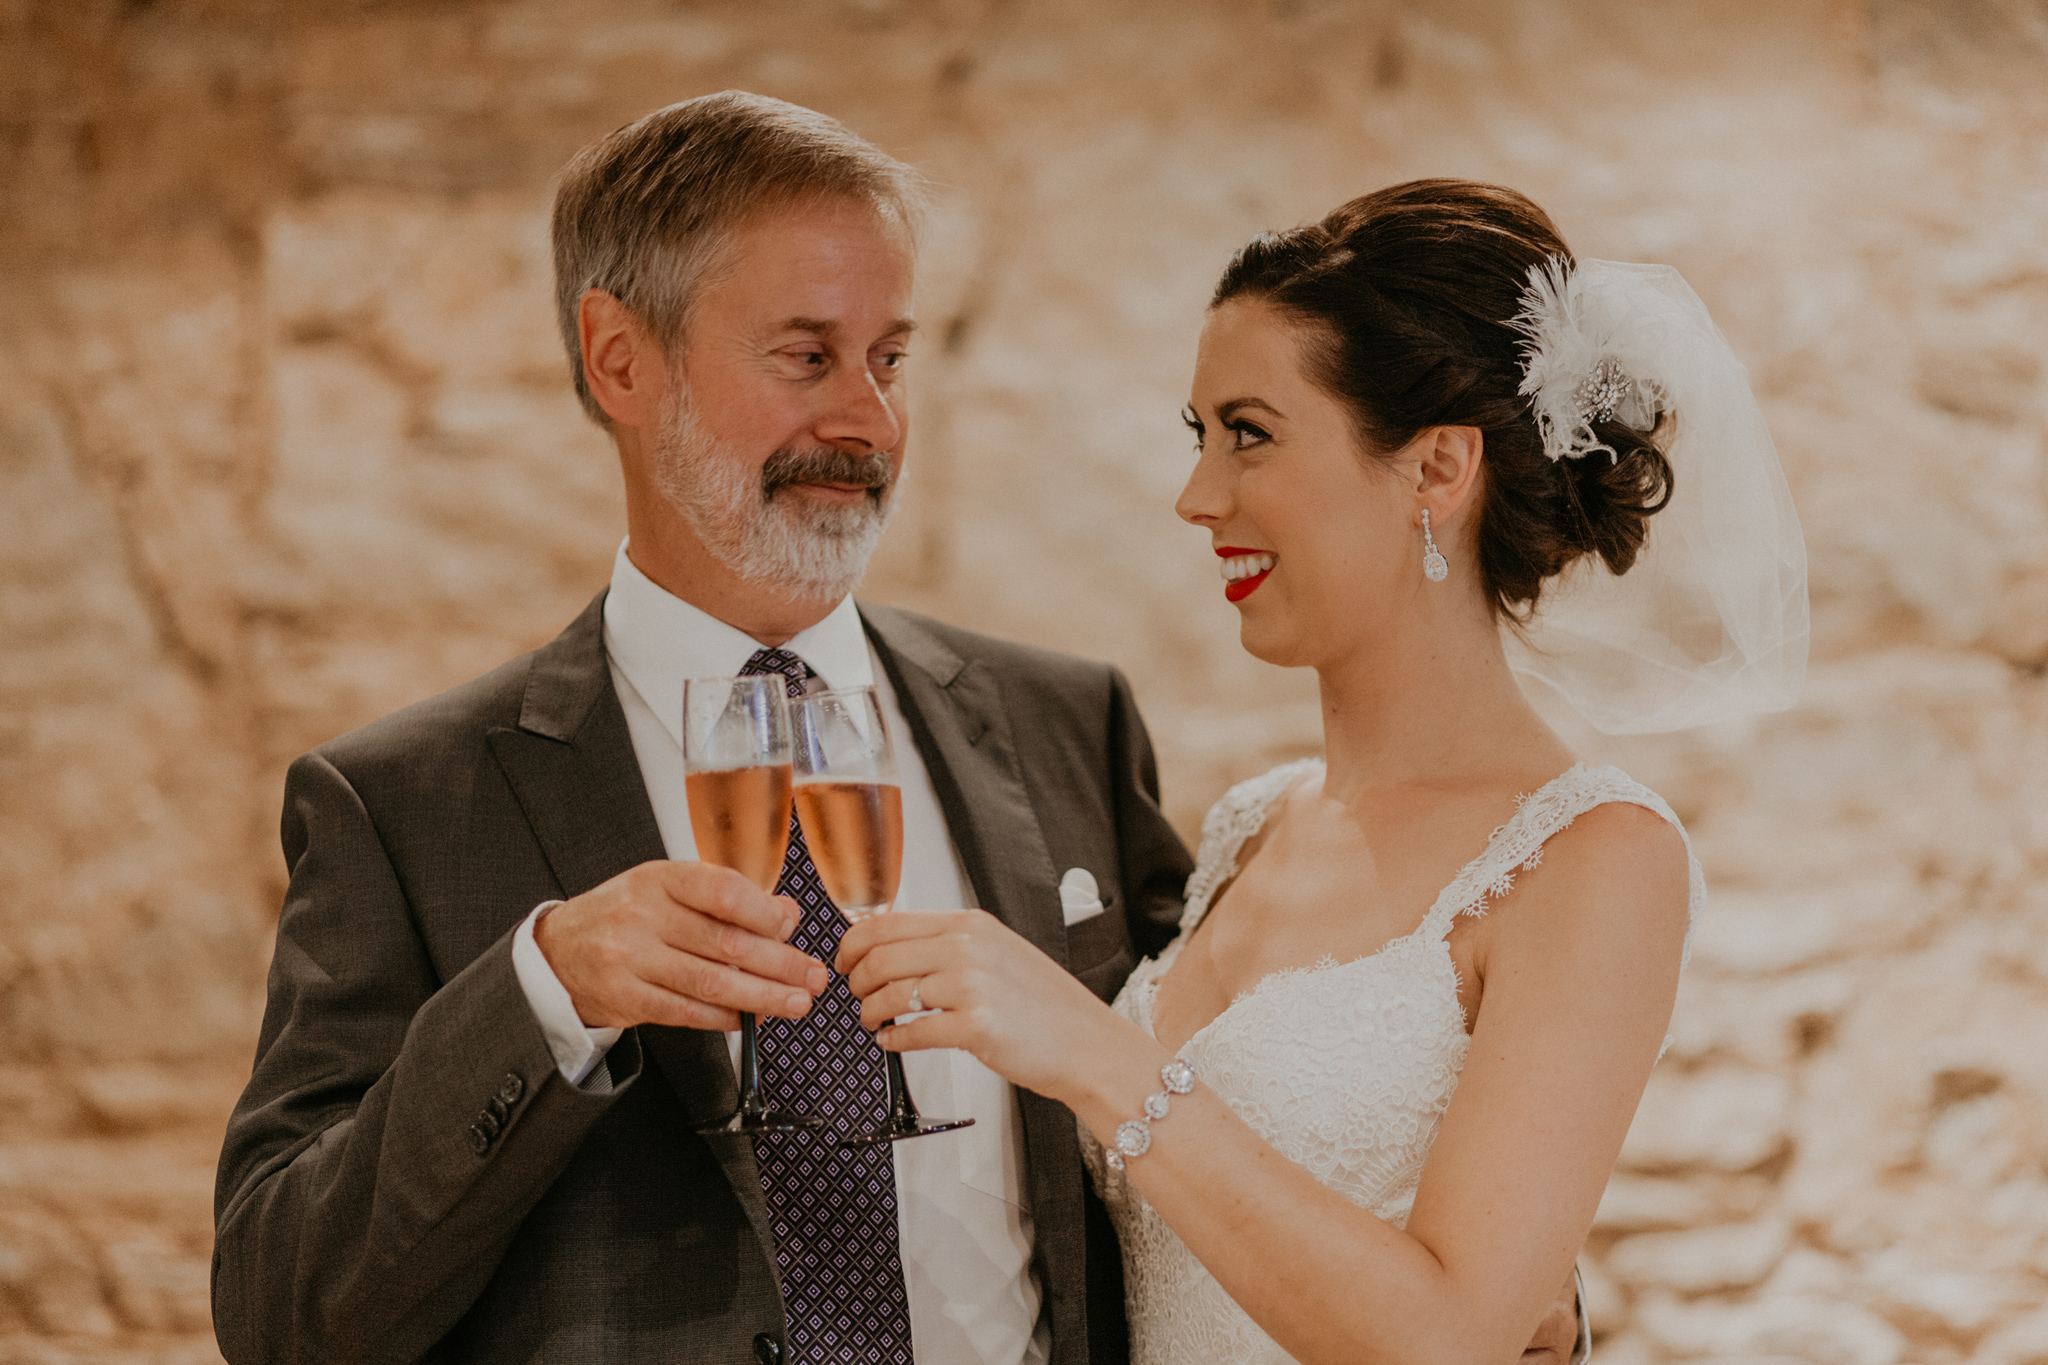 Father of the bride toasts bride during getting ready pictures